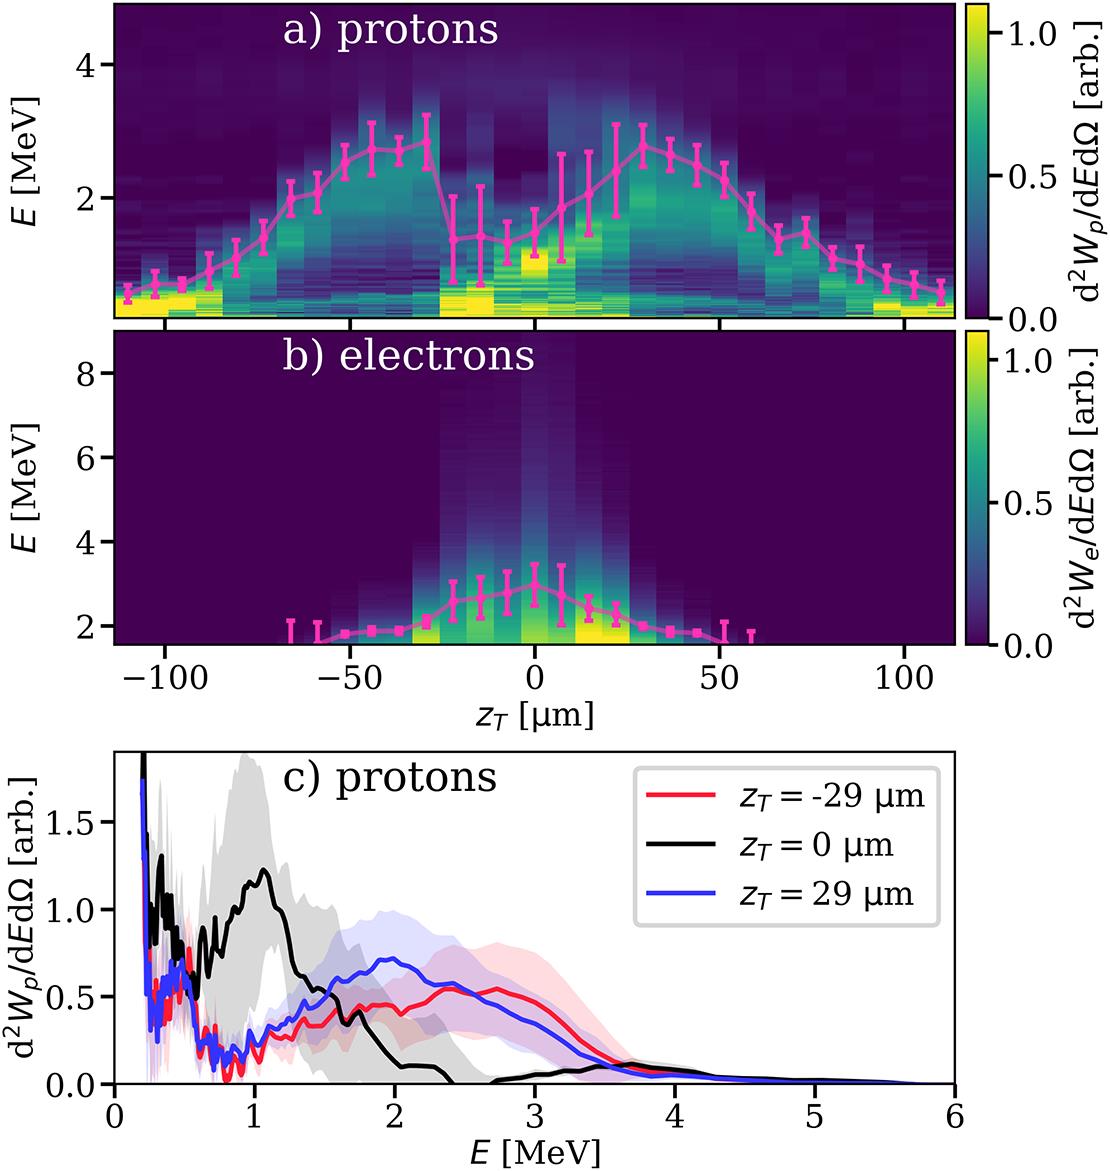 (a) Proton and (b) electron energy spectra from the rear side of the target during an automated target position scan () with a 12 μm Kapton tape and an on-target laser energy of mJ. (c) Average proton spectra (and standard deviation) for different positions as indicated in the legend. The proton spectra are recorded by the time-of-flight diamond detector. Each column of the waterfall plots is the average of the 10 shots from each burst. The scan comprises 31 bursts at different target positions spaced at 7.3 μm intervals along the laser propagation axis. Negative values of are when the target plane is closer to the incoming laser pulse and is the target at the best focus of the laser pulse. The magenta data points, connected with a guide line, indicate the burst-averaged 95th percentile energy as well as the standard deviation of this value across the burst.